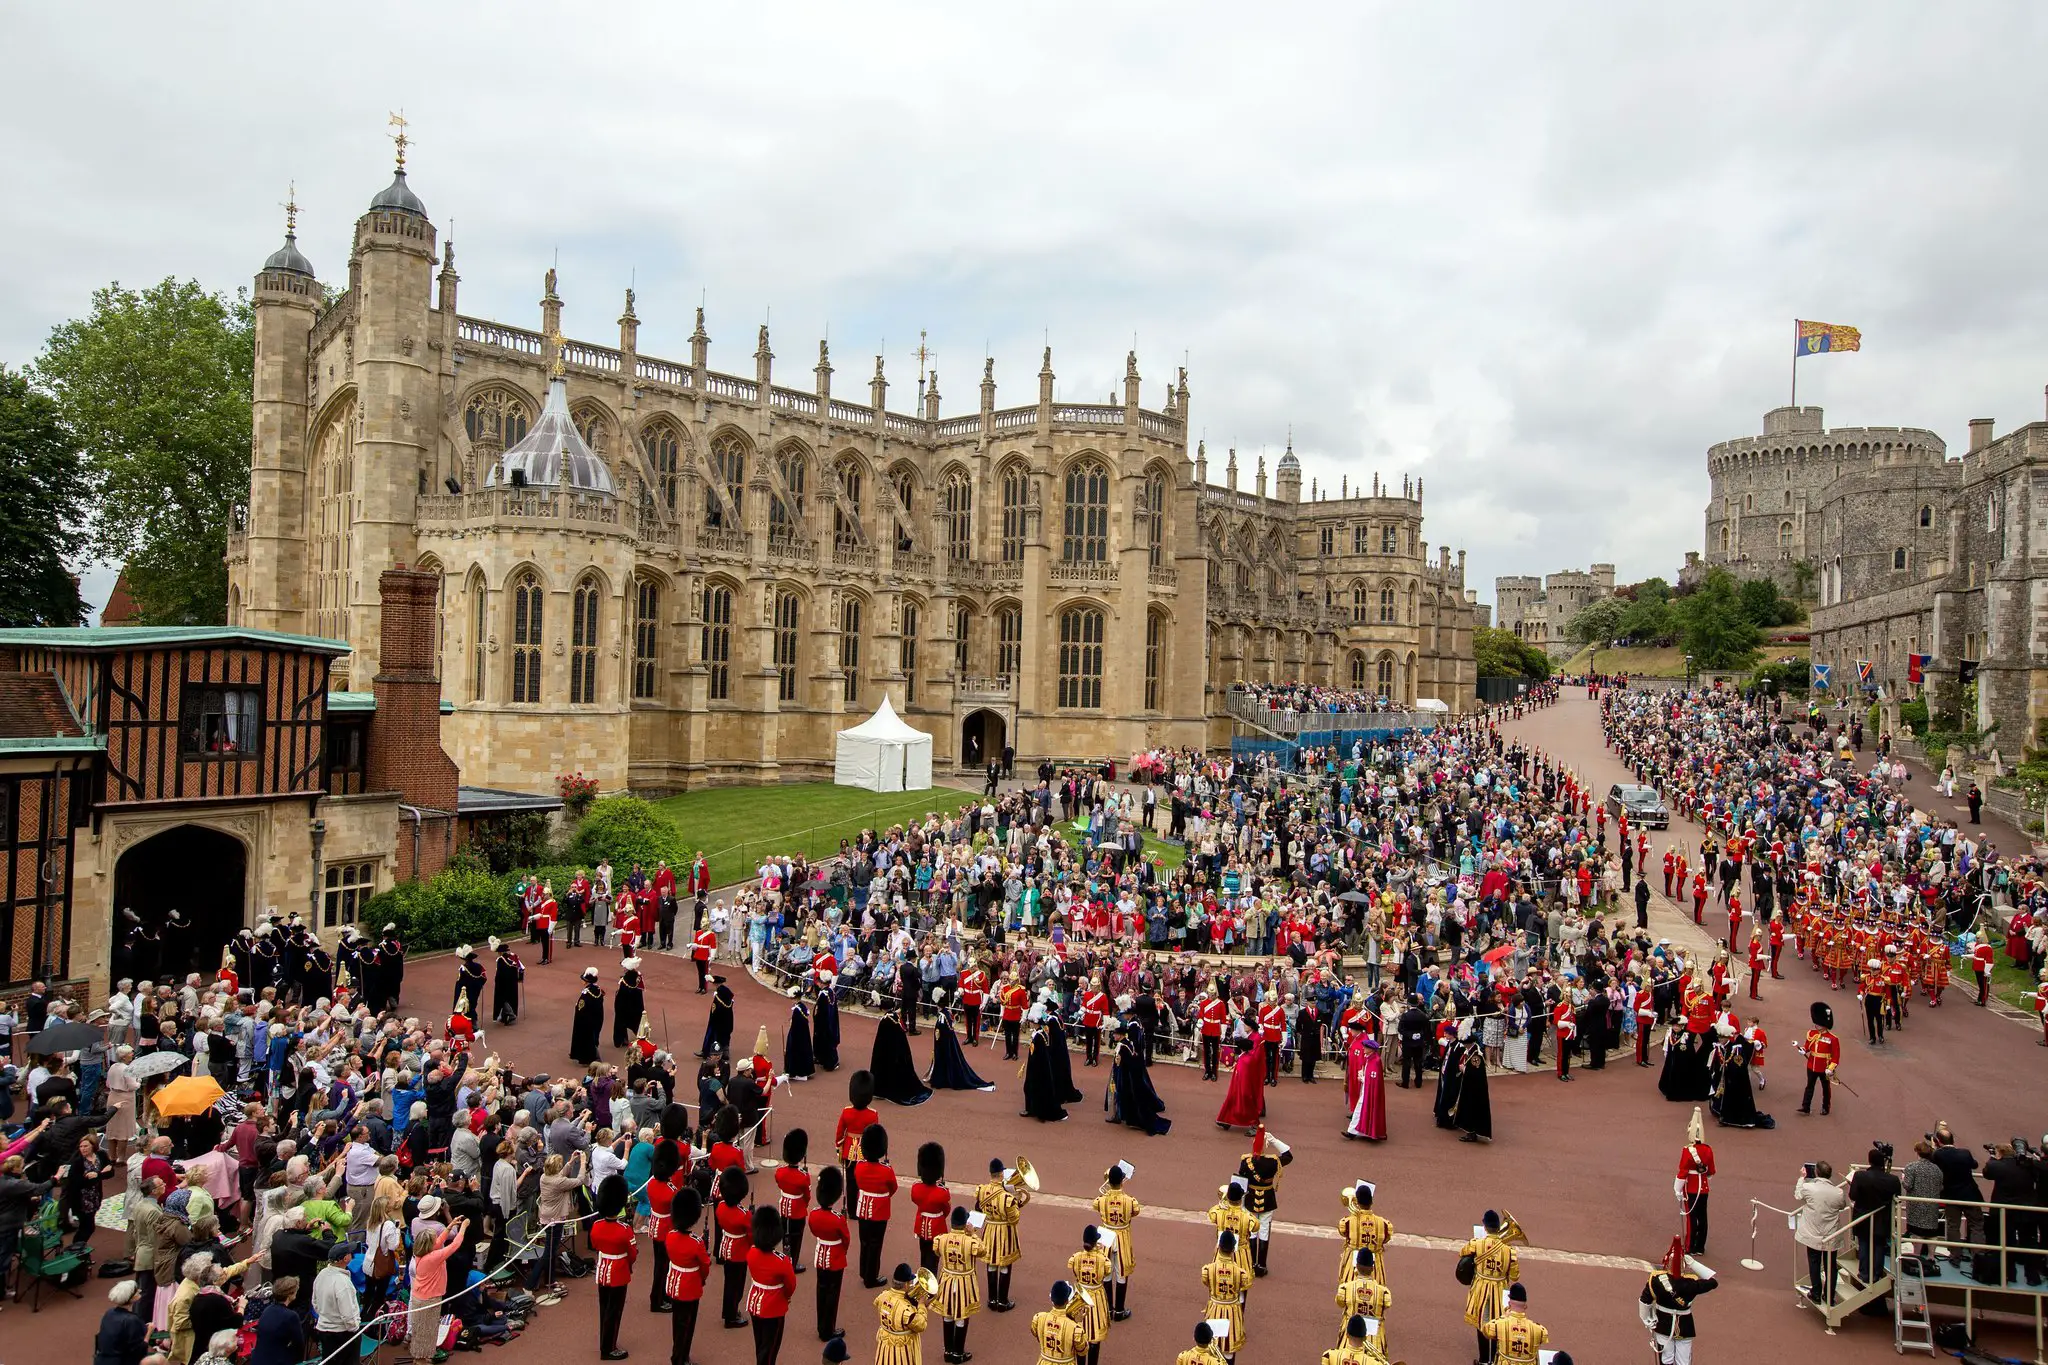 Members of Britain's Royal family and dignitaries take part in the the annual procession for members of the Order of the Garter ahead of the service at St George's Chapel, Windsor Castle England Monday June 16, 2014. At left is St Georges Chapel and at right Windsor Castle. (AP Photo/Steve Parsons/Pool)